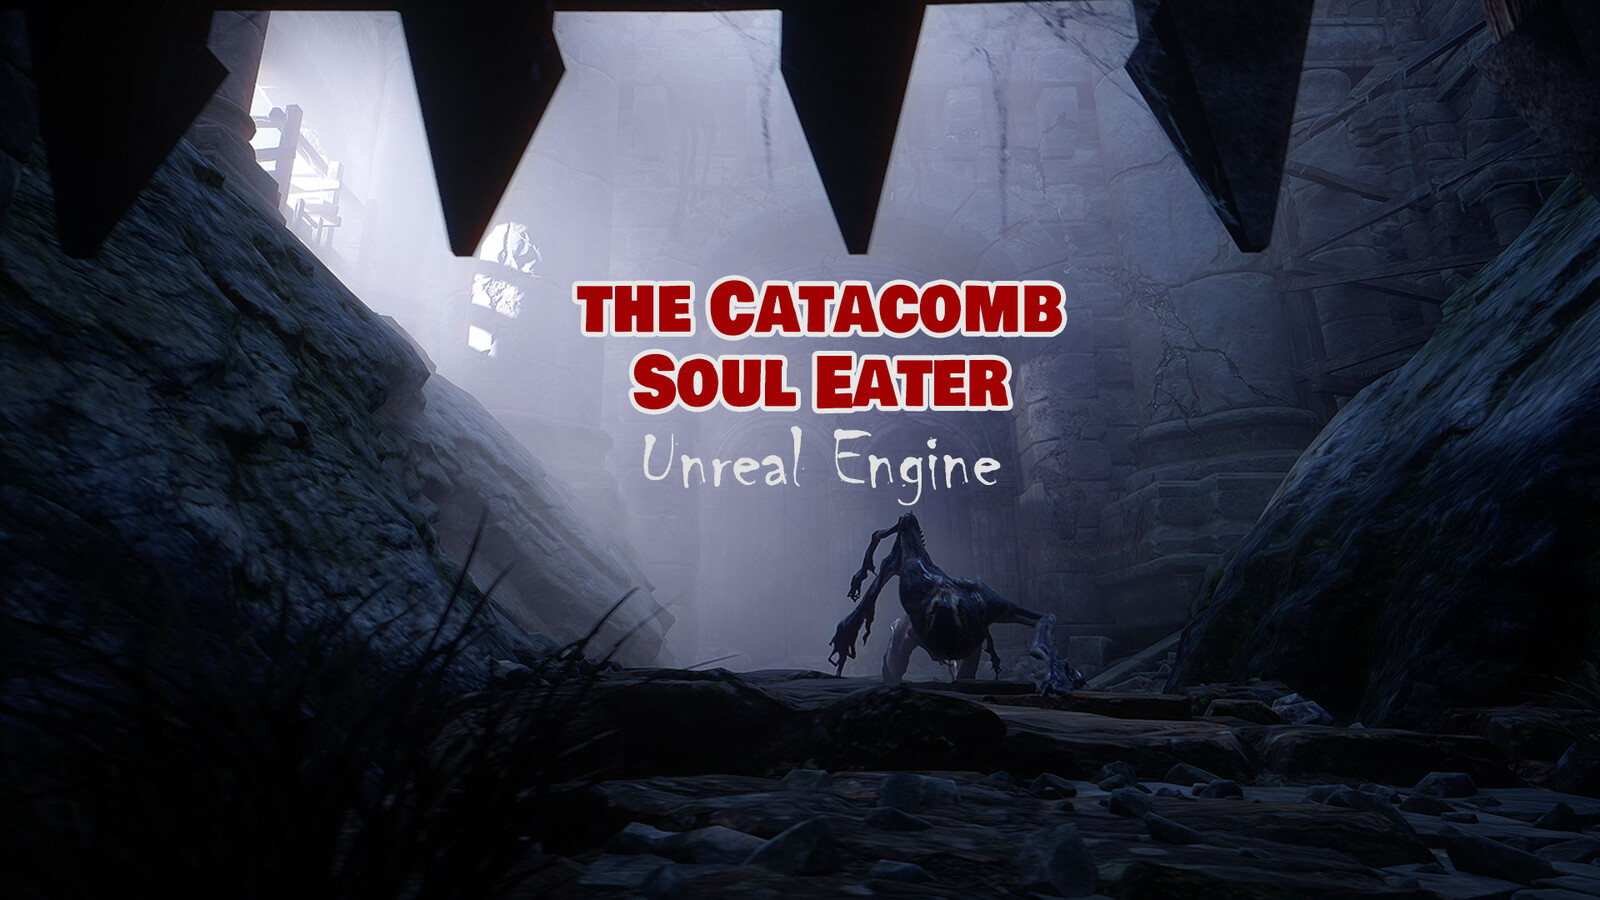 The Catacomb Soul Eater